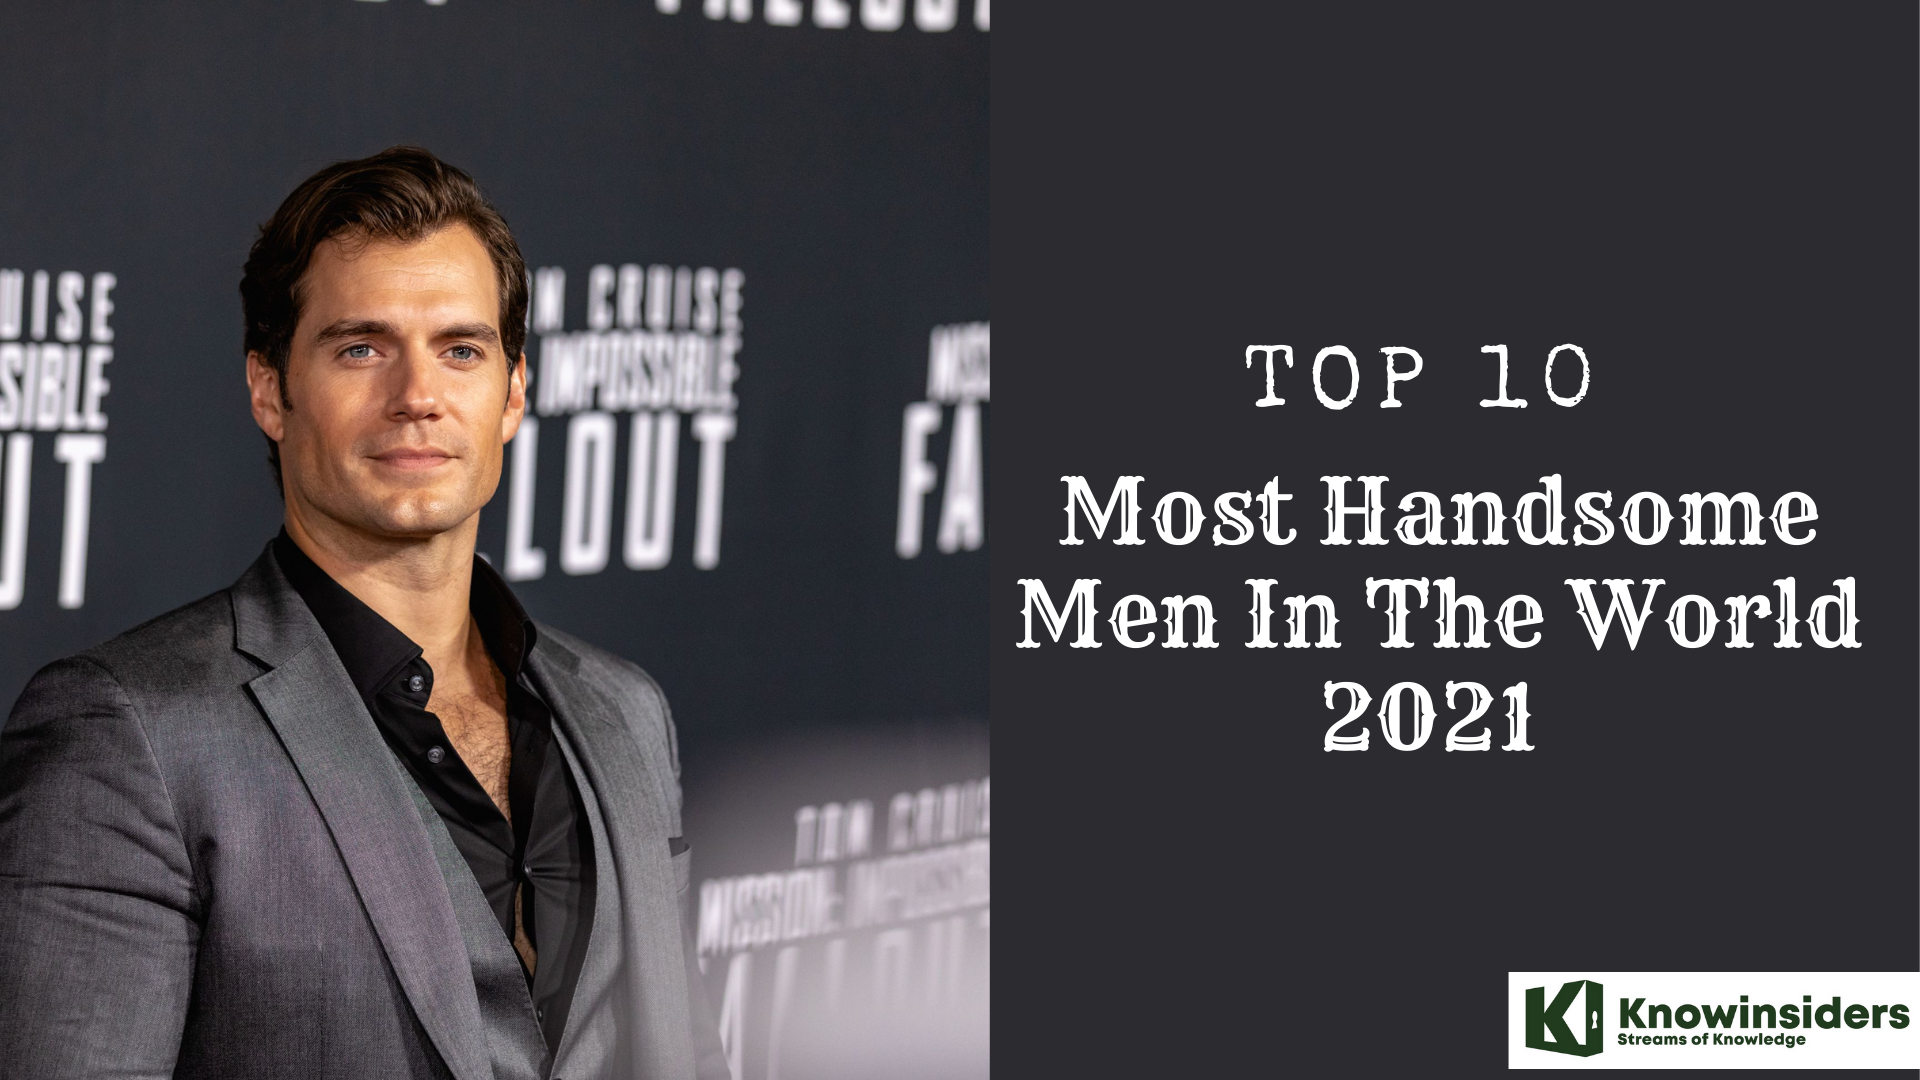 Top 10 most handsome men in the world in 2021 